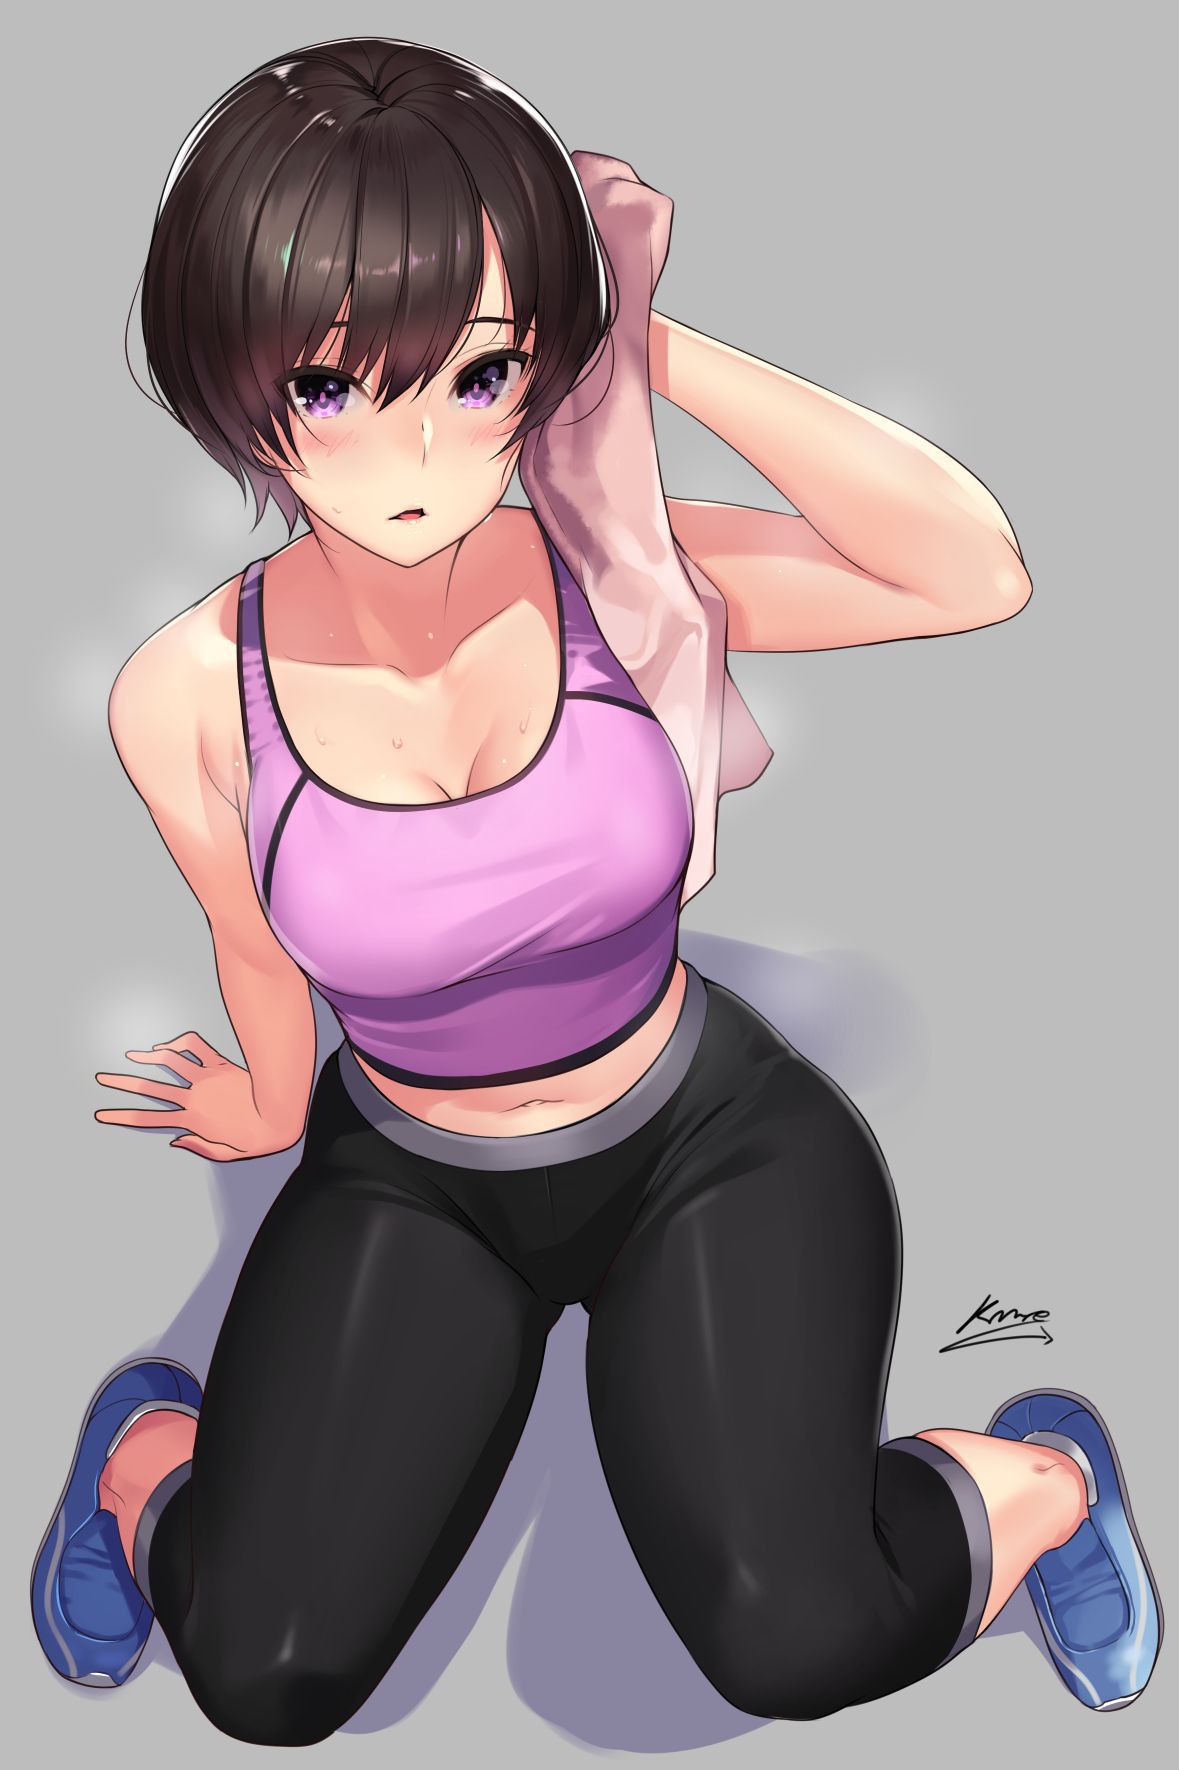 [2nd] The second erotic image of a pretty girl wearing a sports bra [sports bra] 27